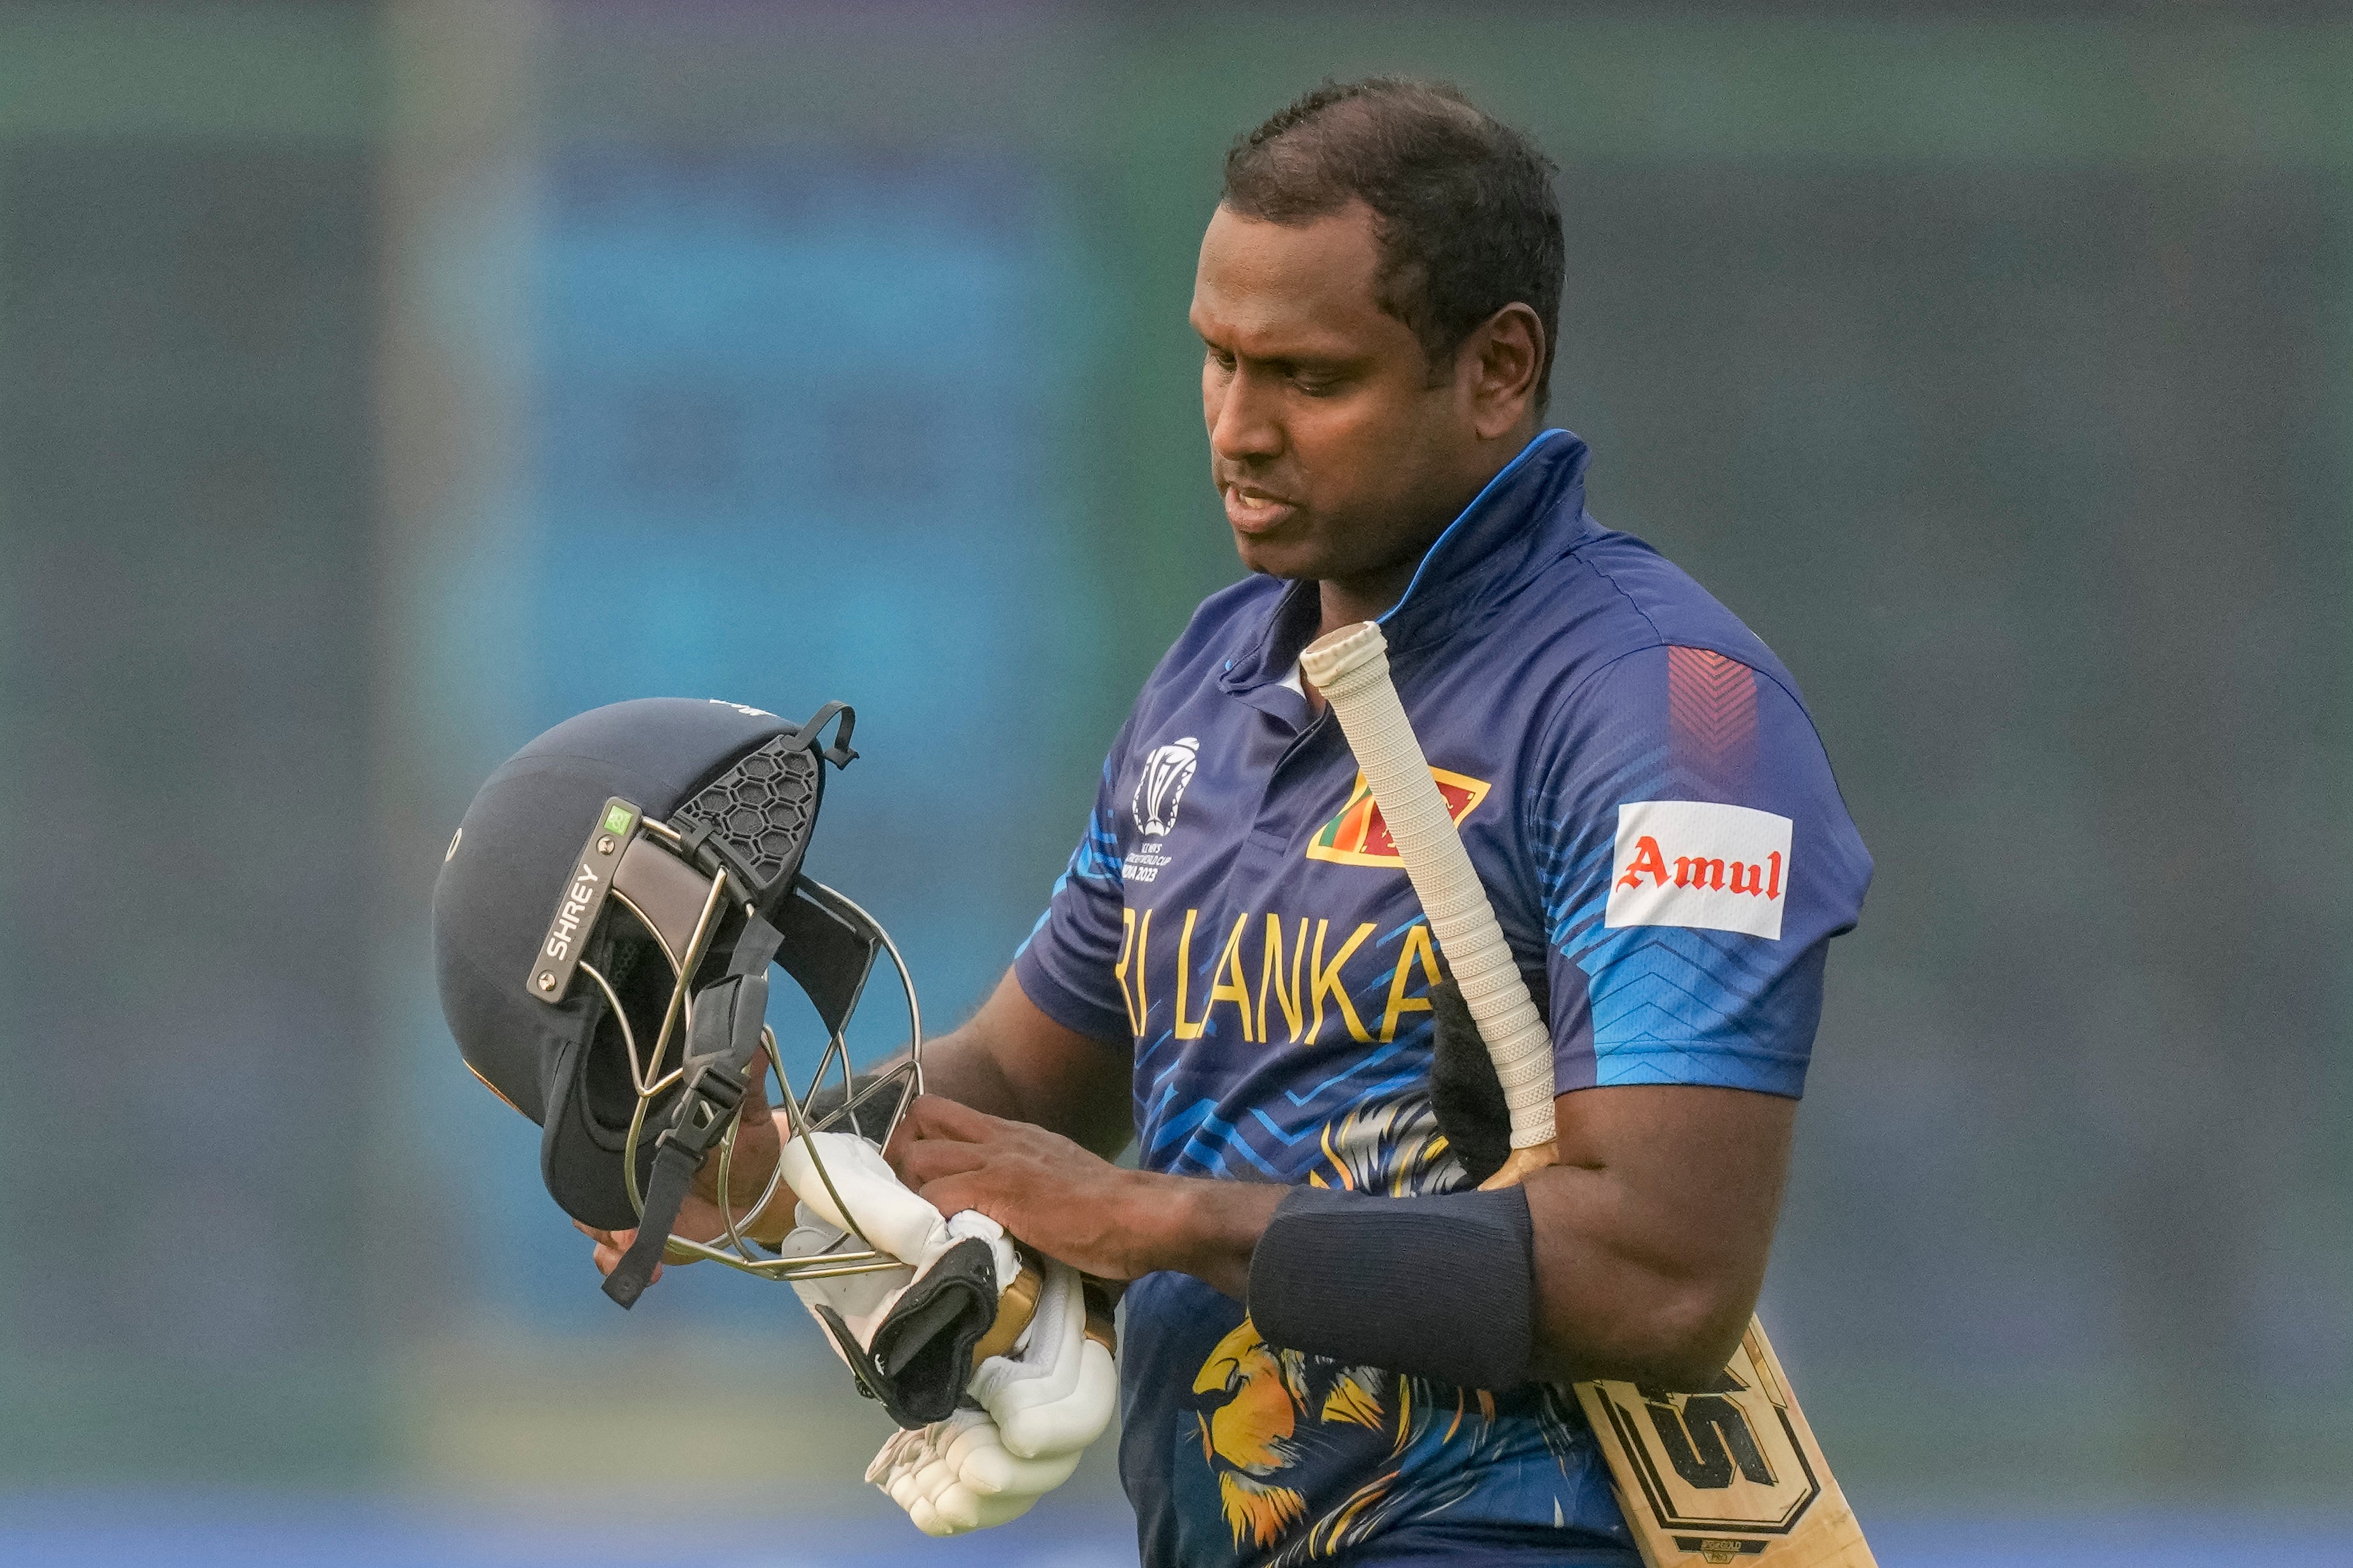 Sri Lankan batter Angelo Mathews was ‘timed out’ in the Cricket World Cup match against Bangladesh